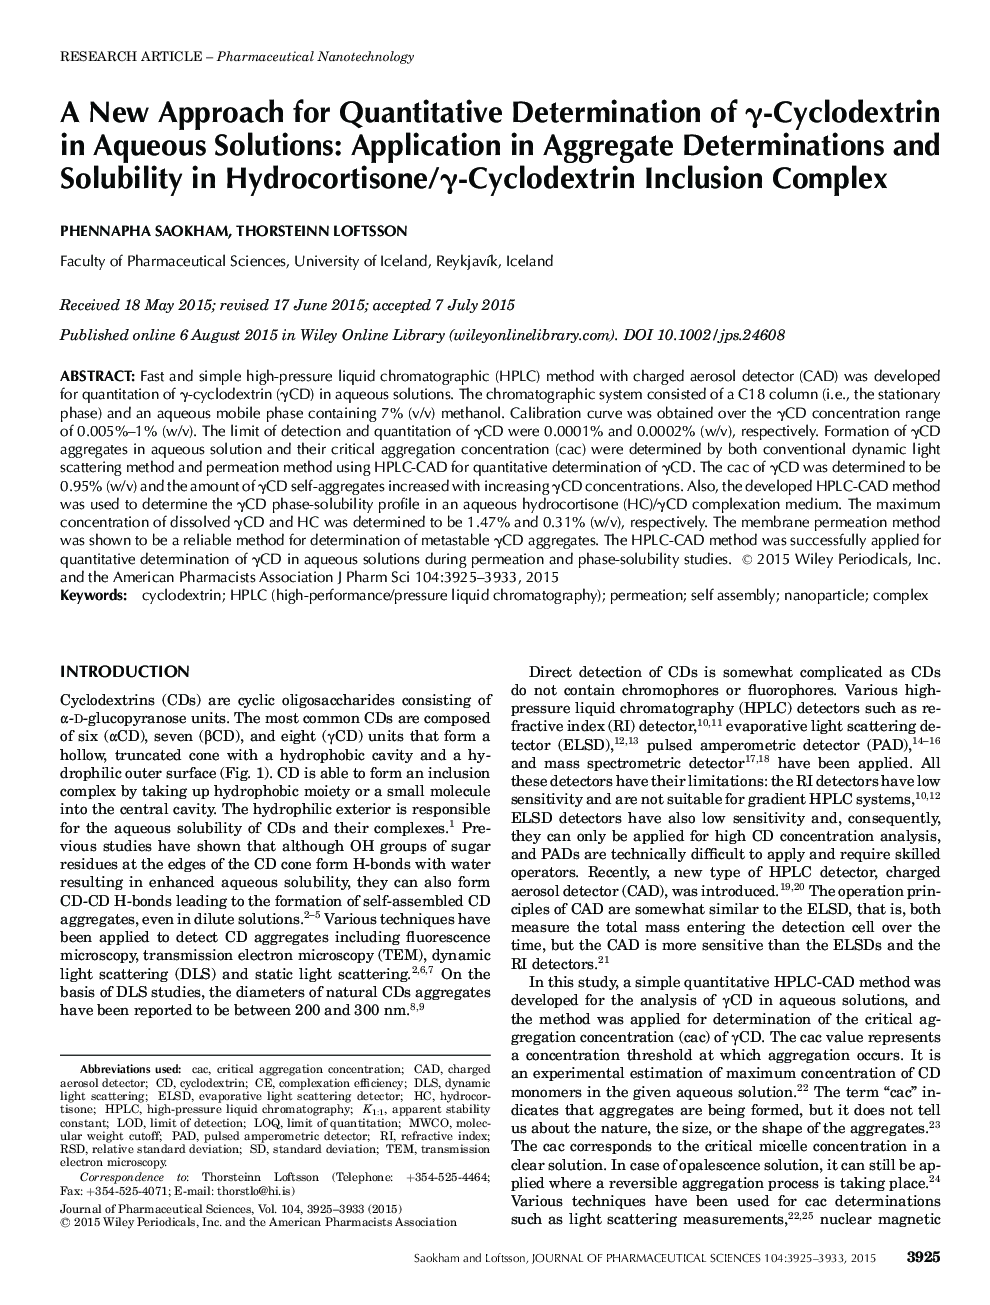 A New Approach for Quantitative Determination of Î³-Cyclodextrin in Aqueous Solutions: Application in Aggregate Determinations and Solubility in Hydrocortisone/Î³-Cyclodextrin Inclusion Complex